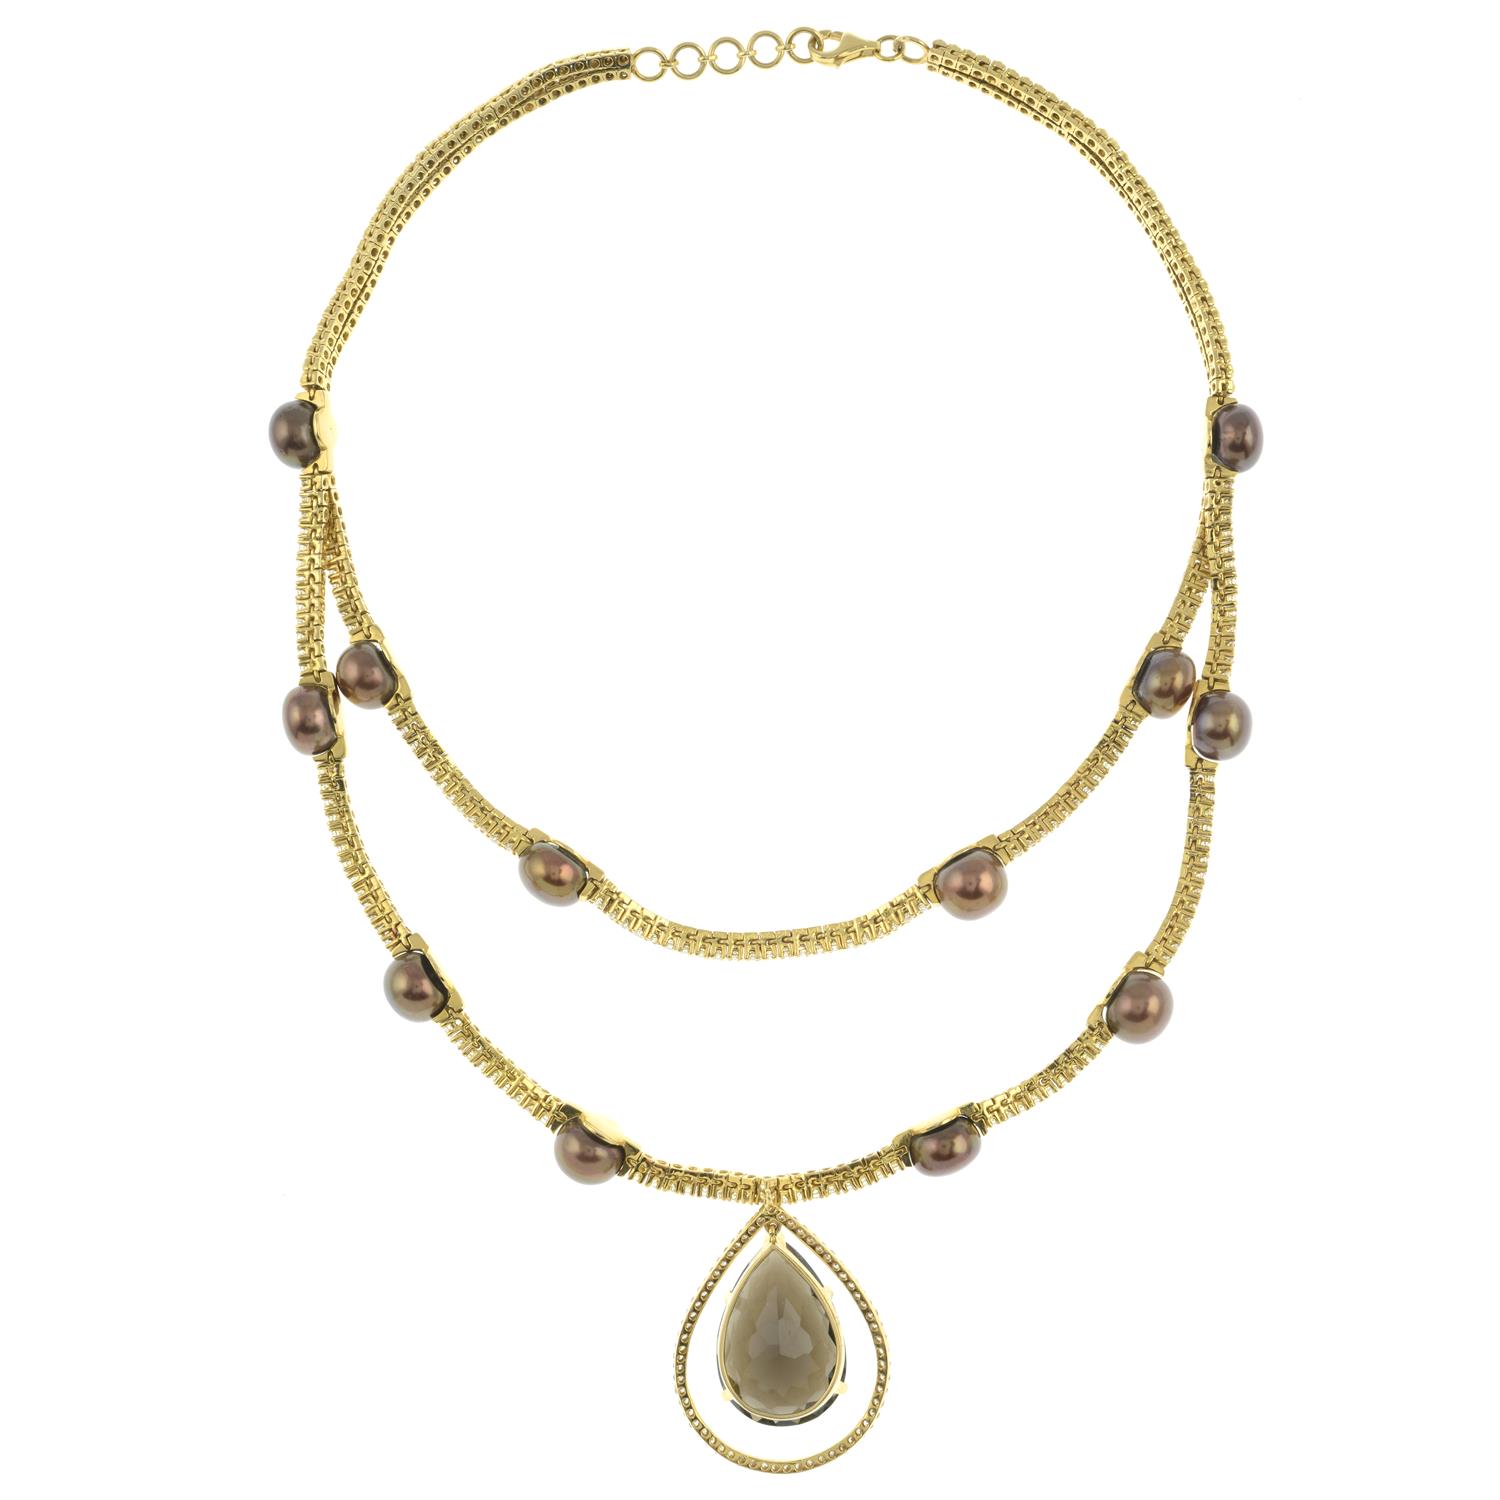 Diamond and gem necklace, with matching earrings - Image 8 of 8